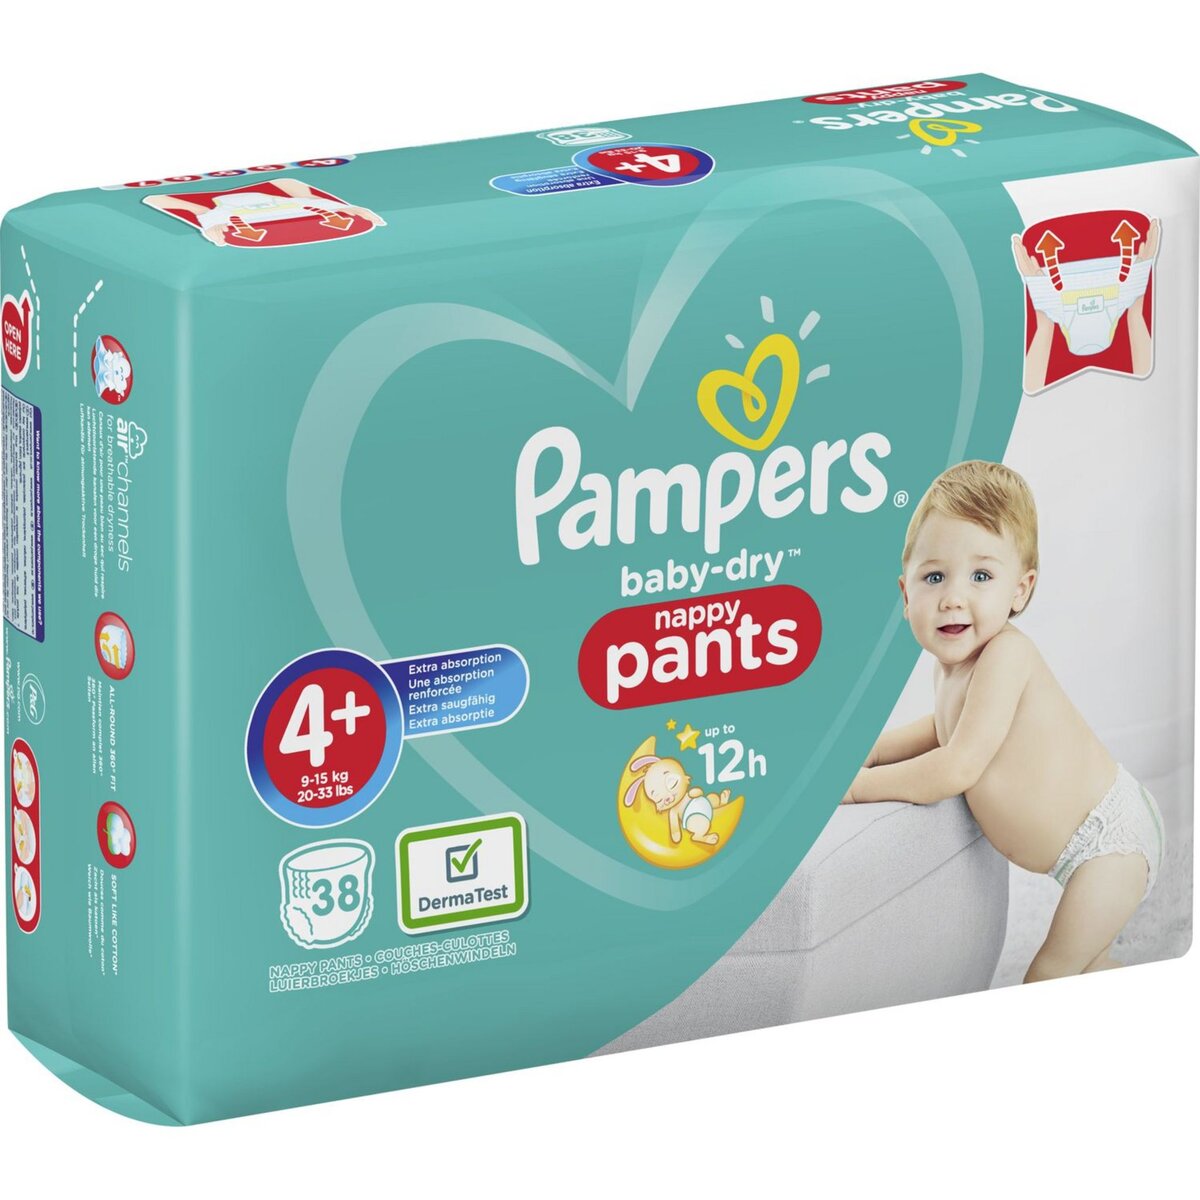 PAMPERS Pampers Baby-dry pants couches-culottes taille 4+ (9-15kg) x38 38 couches